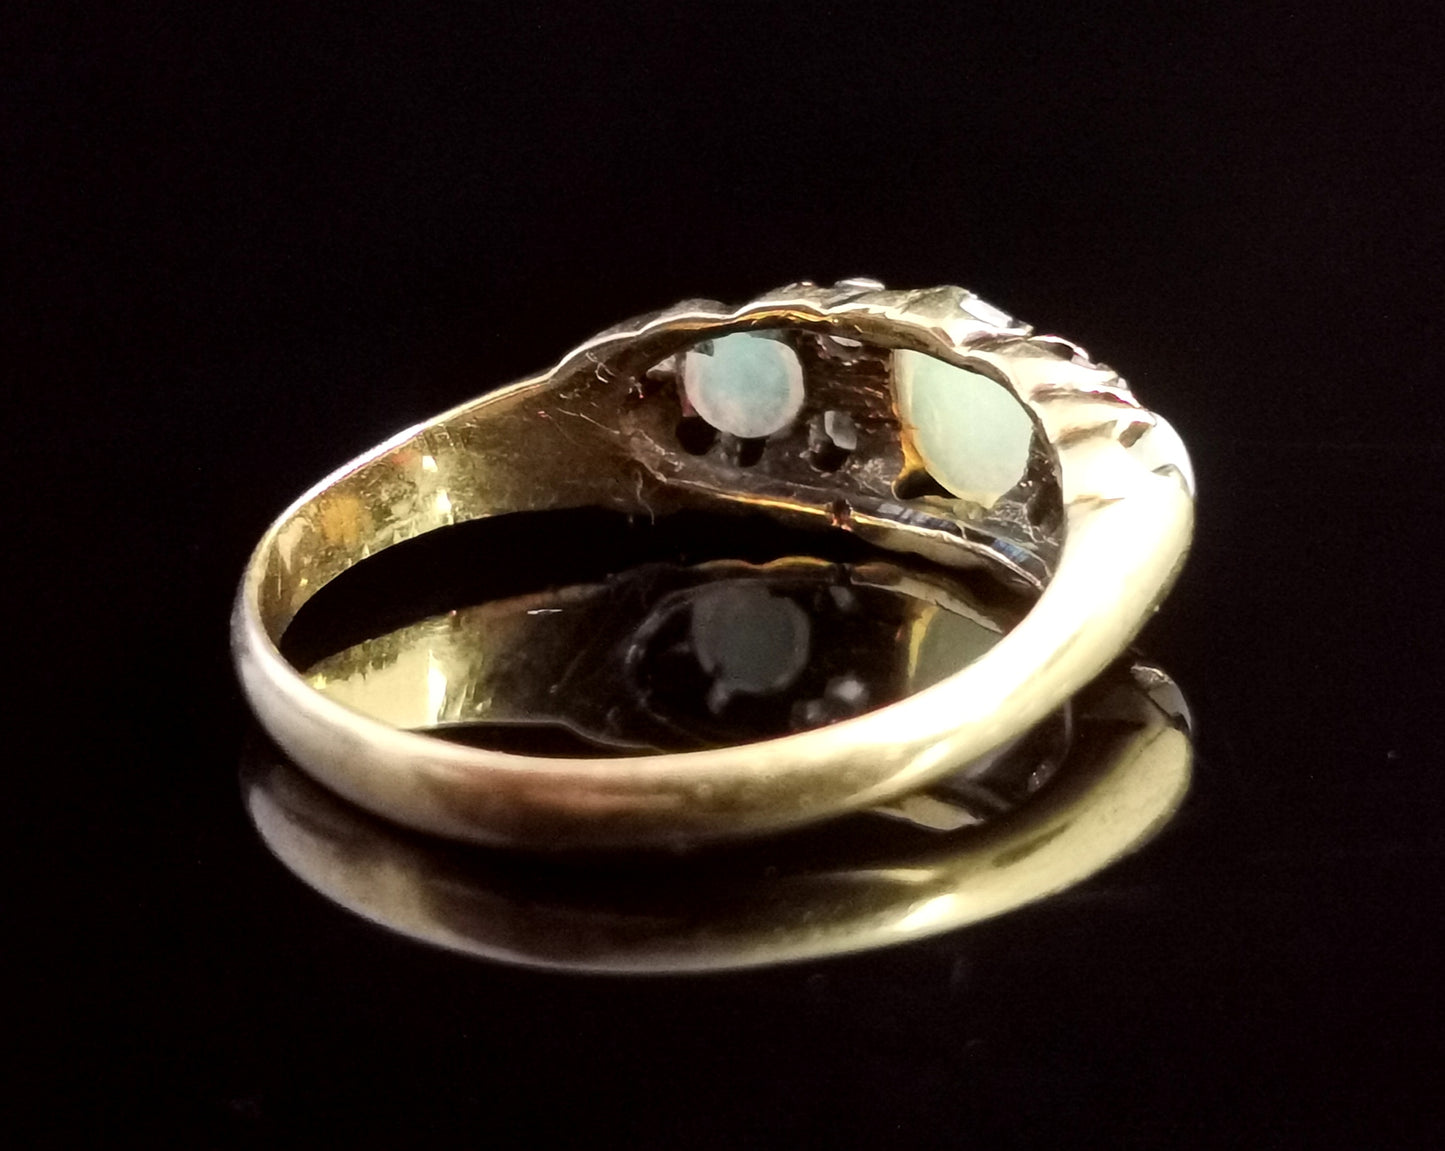 Antique Opal and Rose cut diamond ring, 18ct gold, Victorian